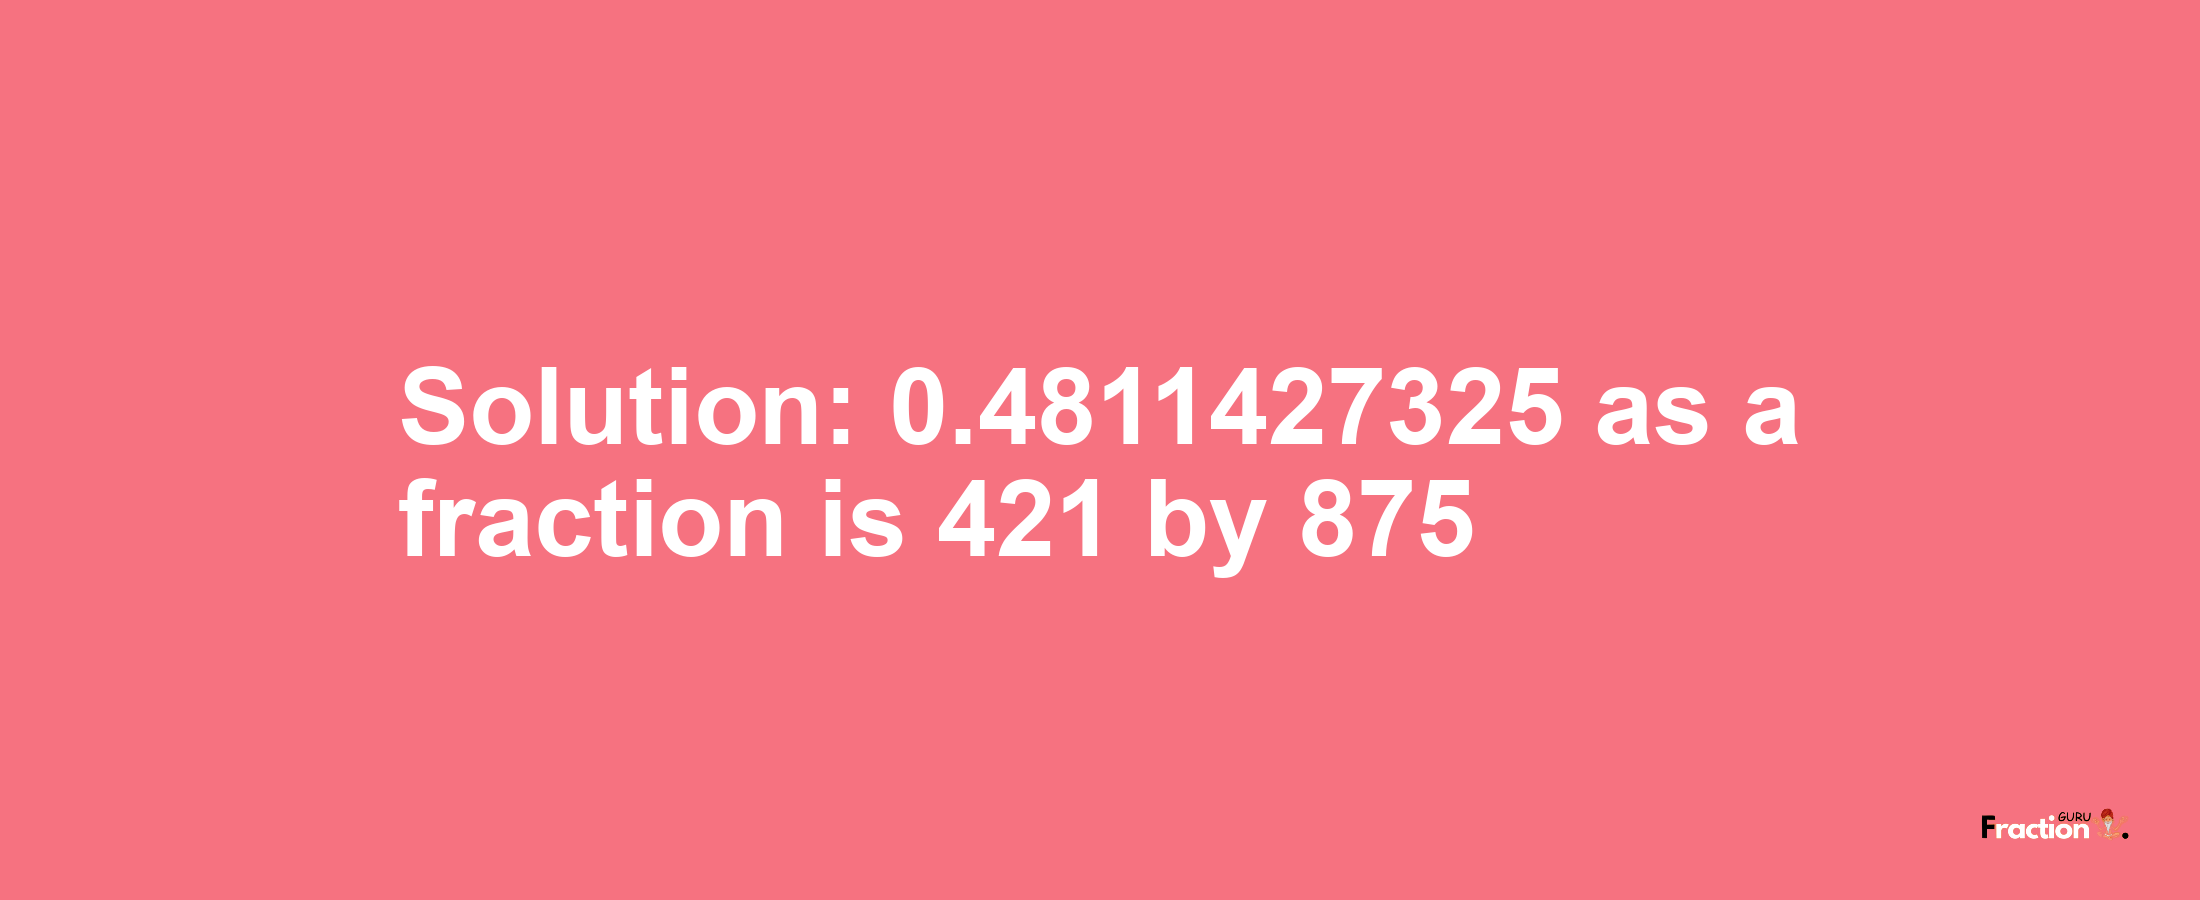 Solution:0.4811427325 as a fraction is 421/875